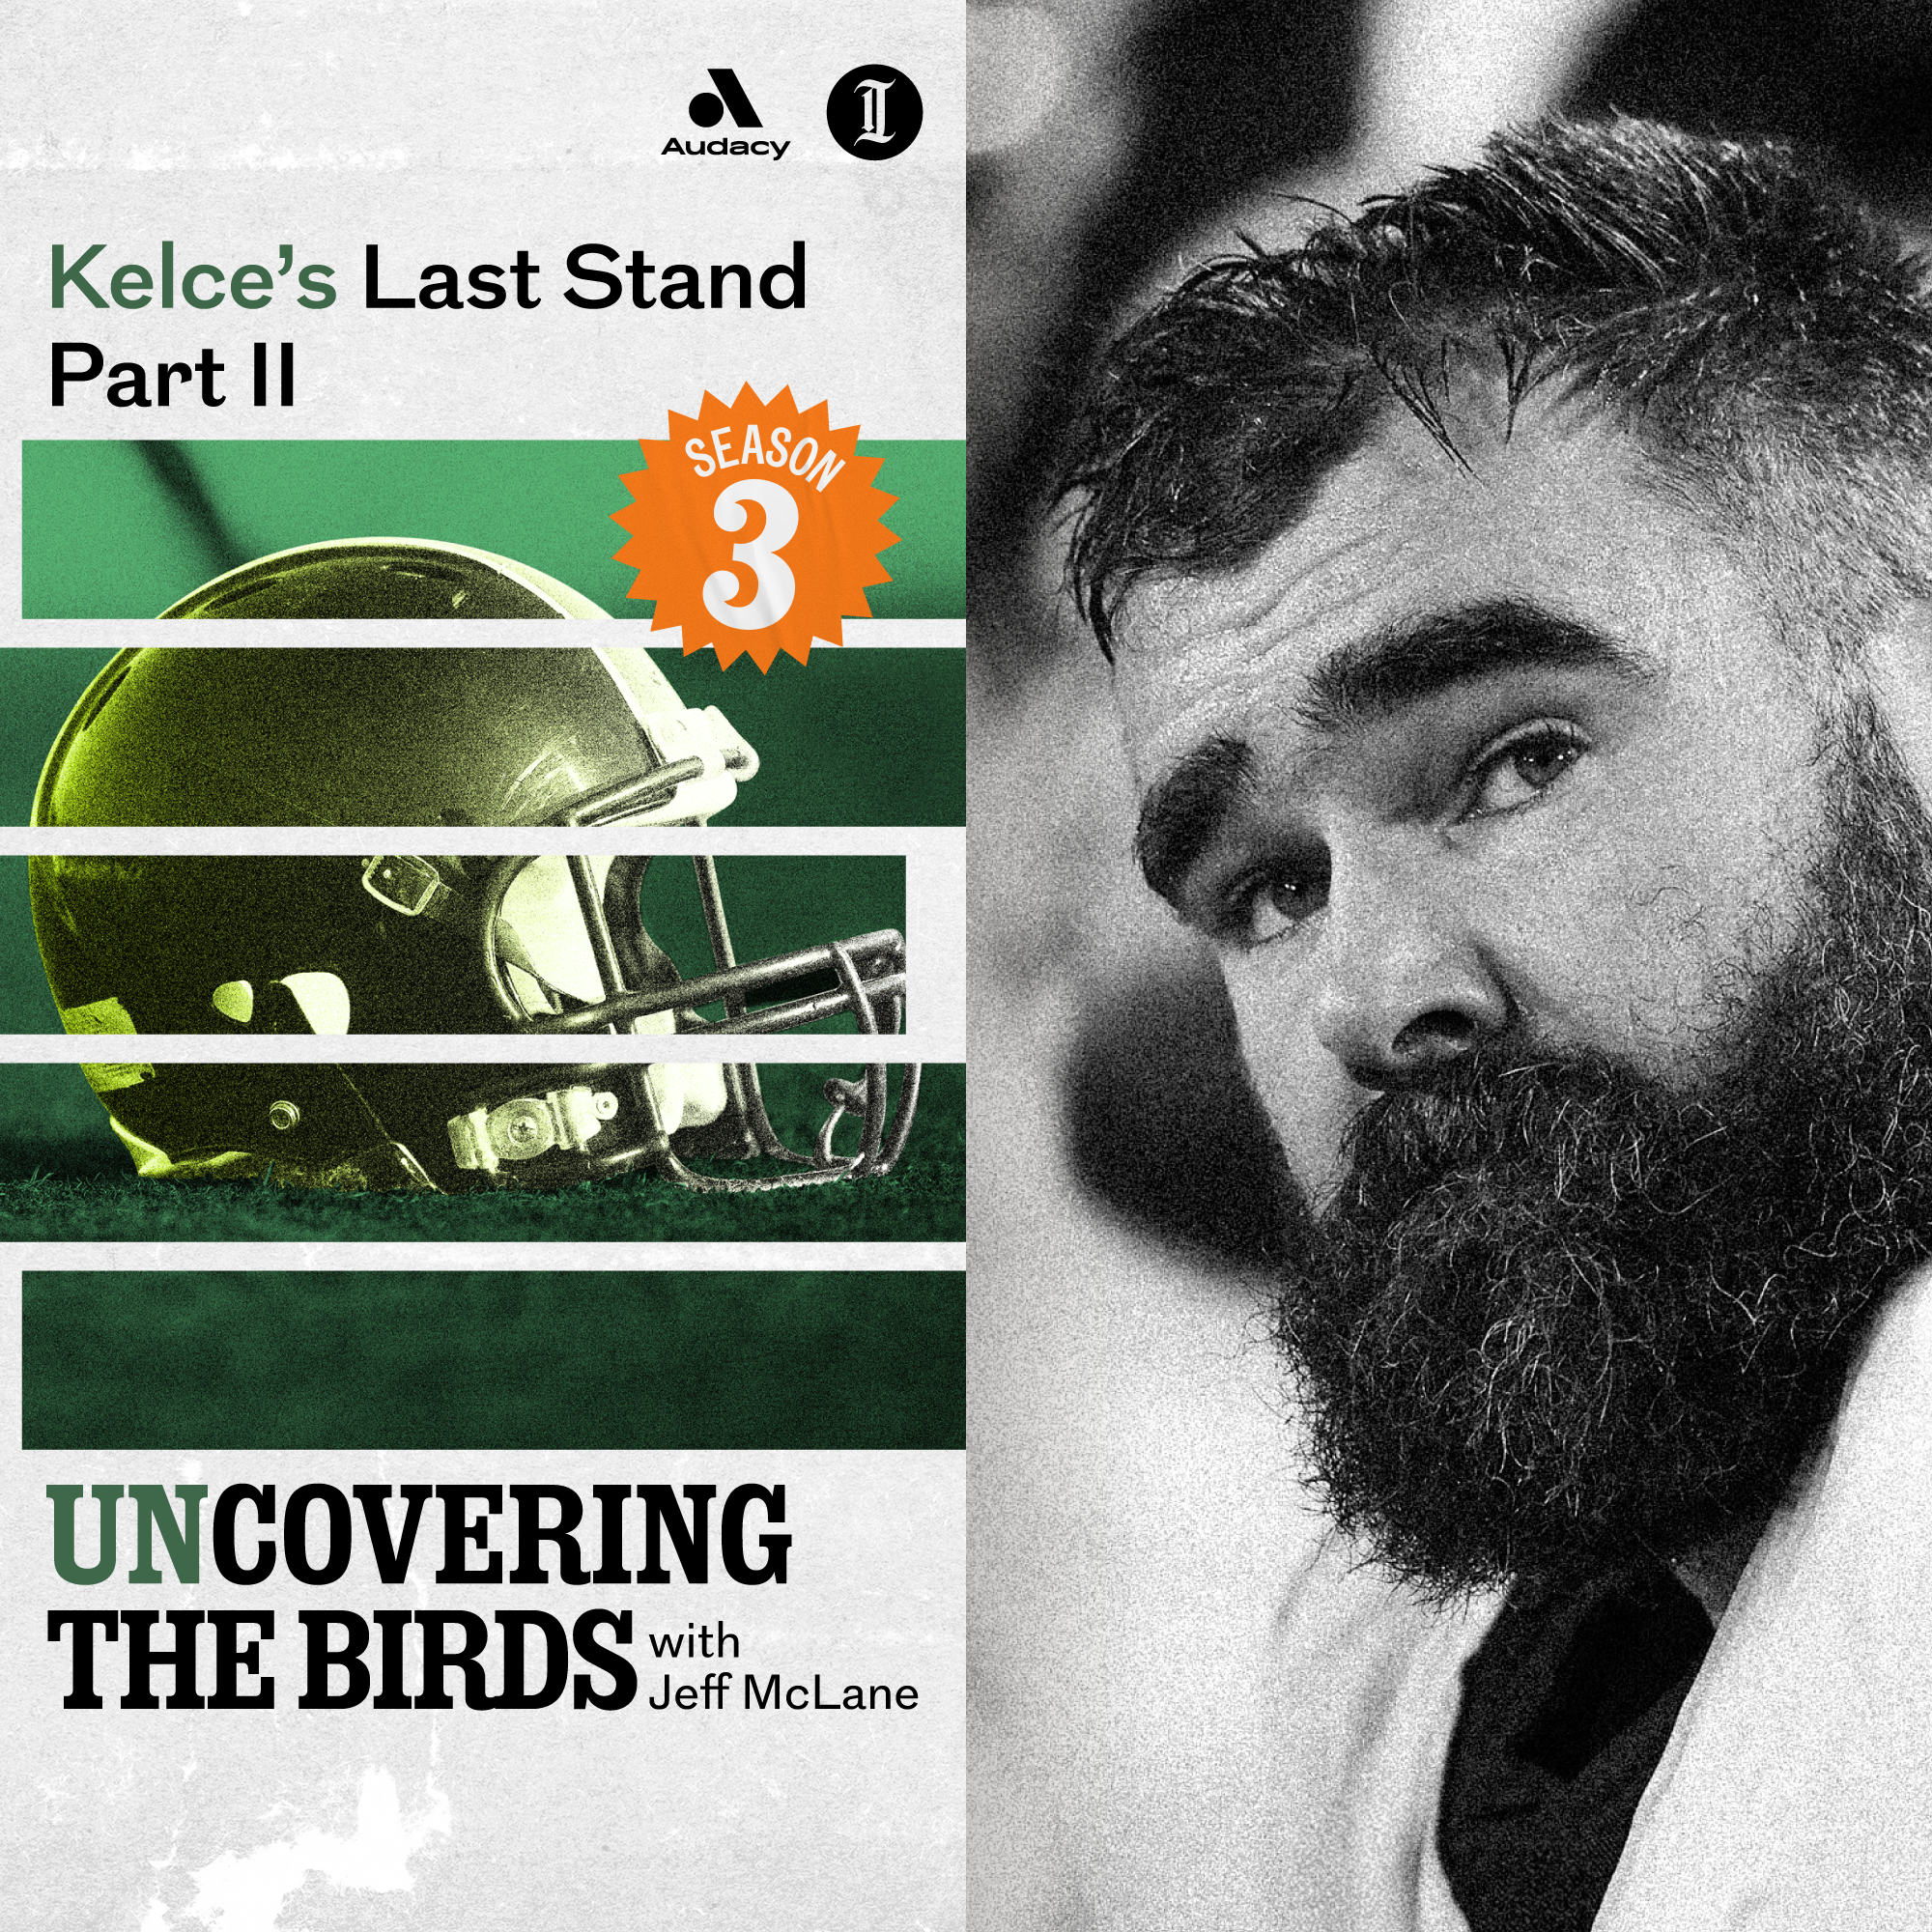 Kelce's last stand: Part 2